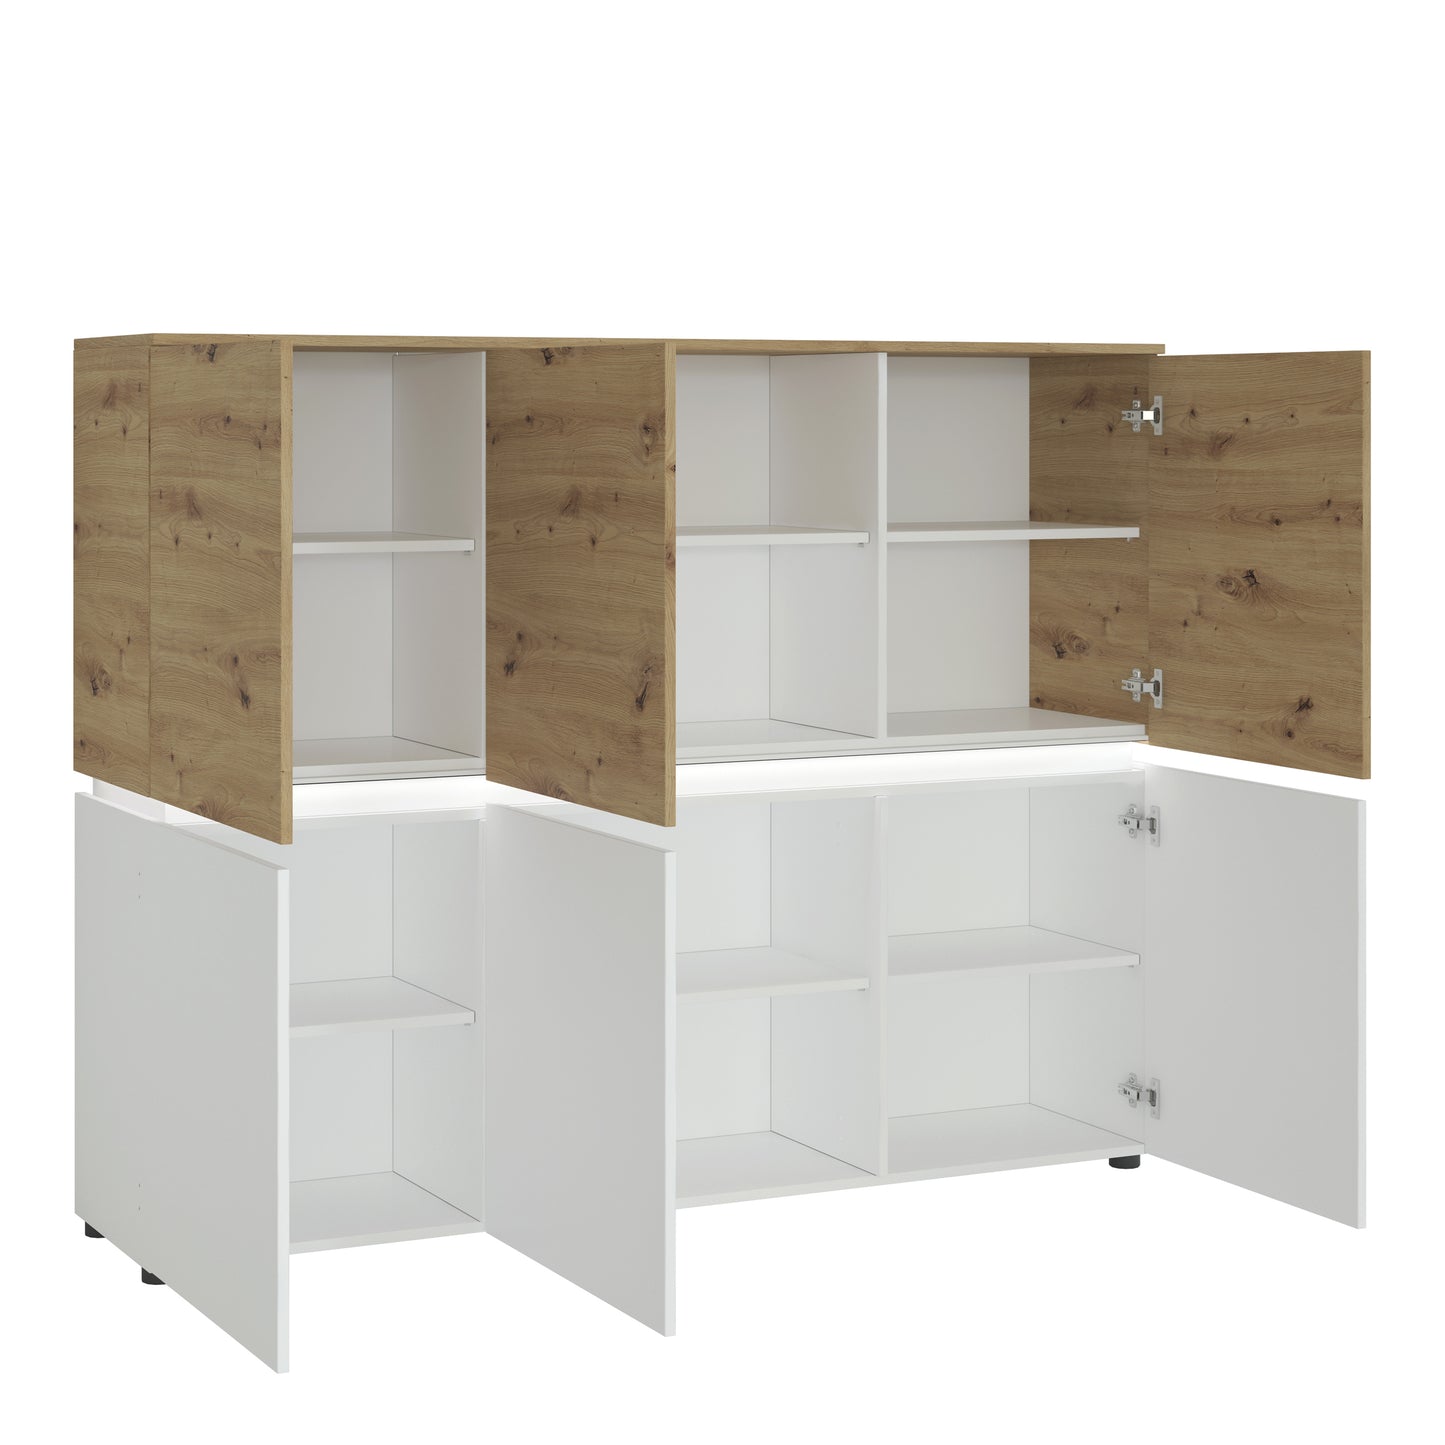 Luci Bright Luci 6 door cabinet (including LED lighting) in White and Oak